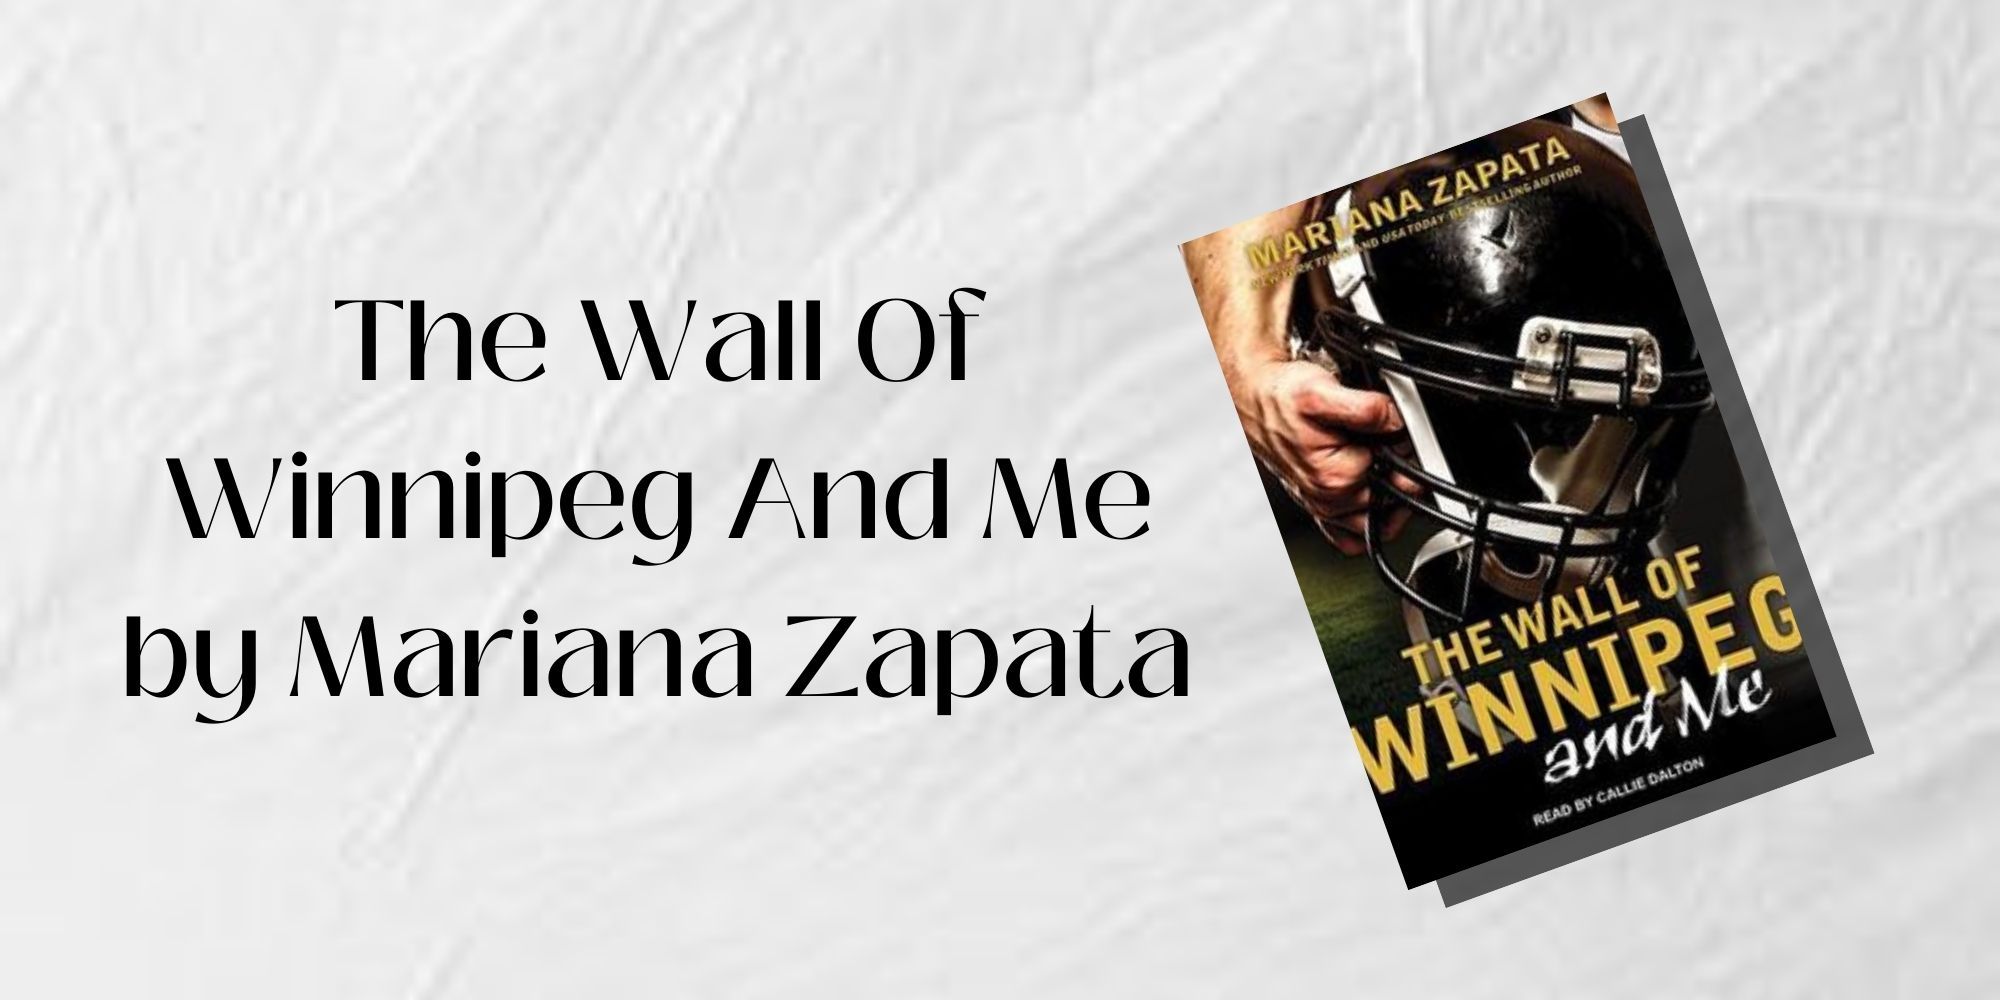 The Cover of The Wall Of Winnipeg And Me by Mariana Zapata